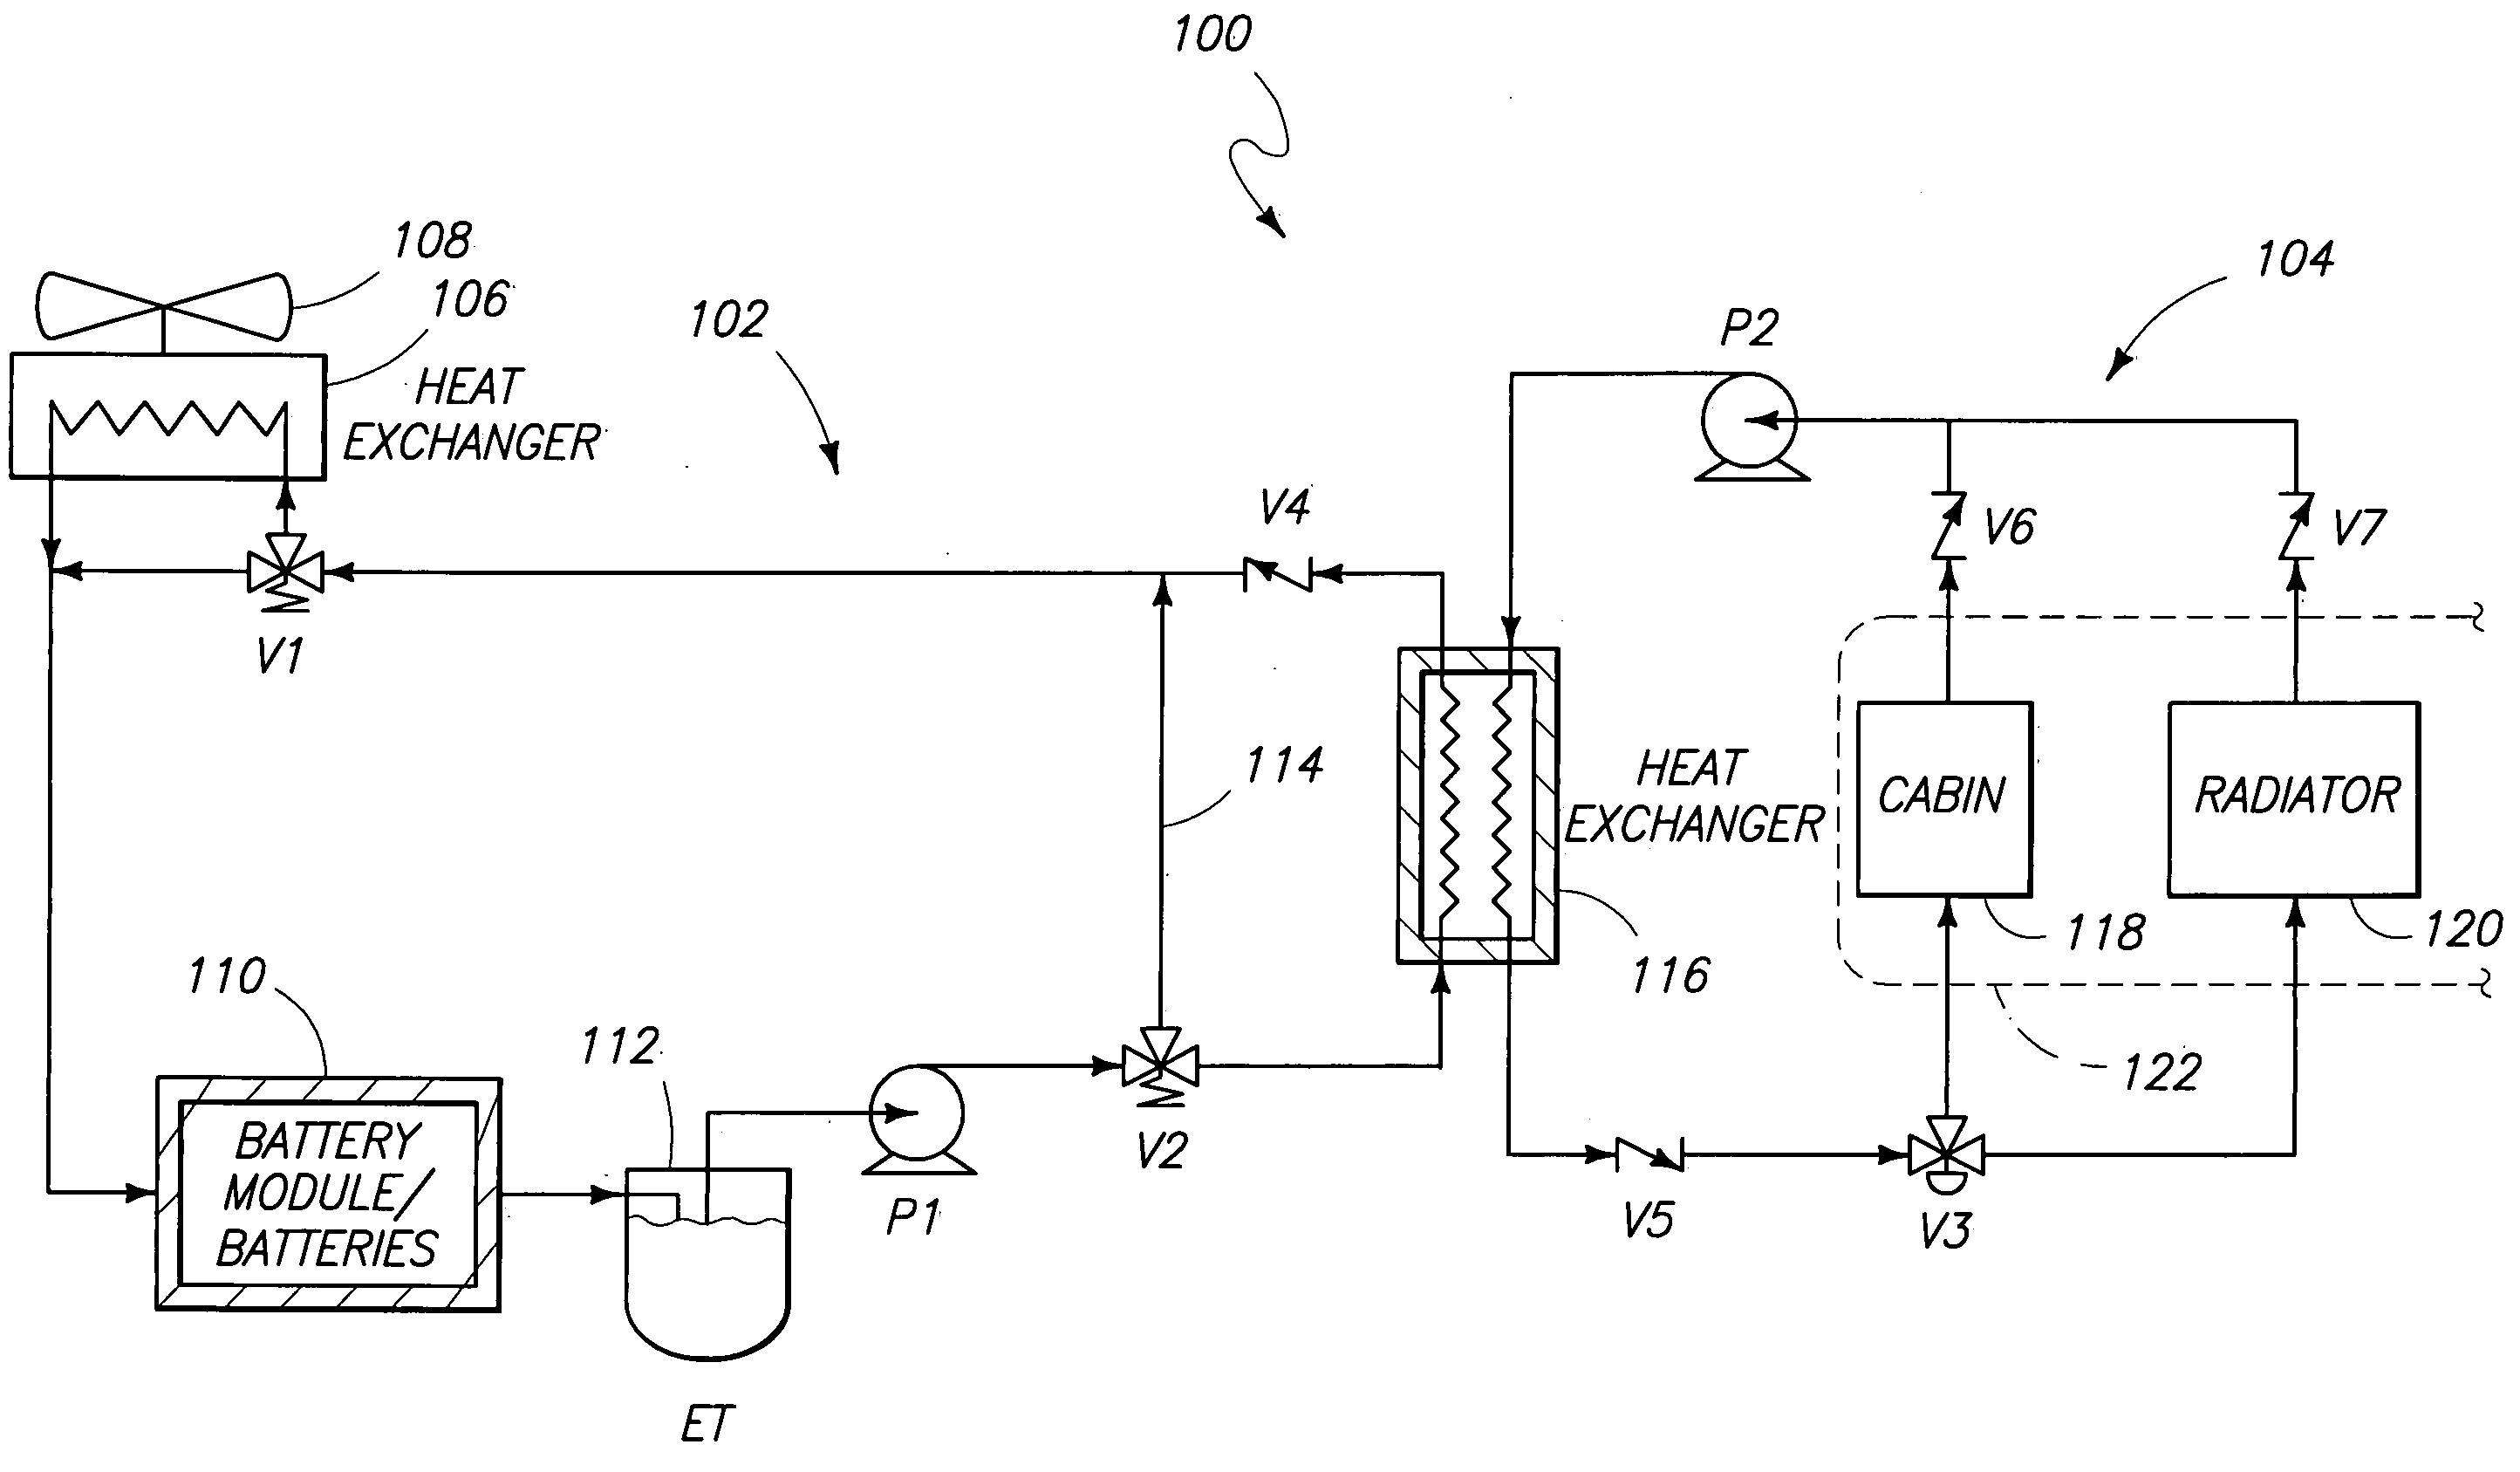 Thermal management systems and methods